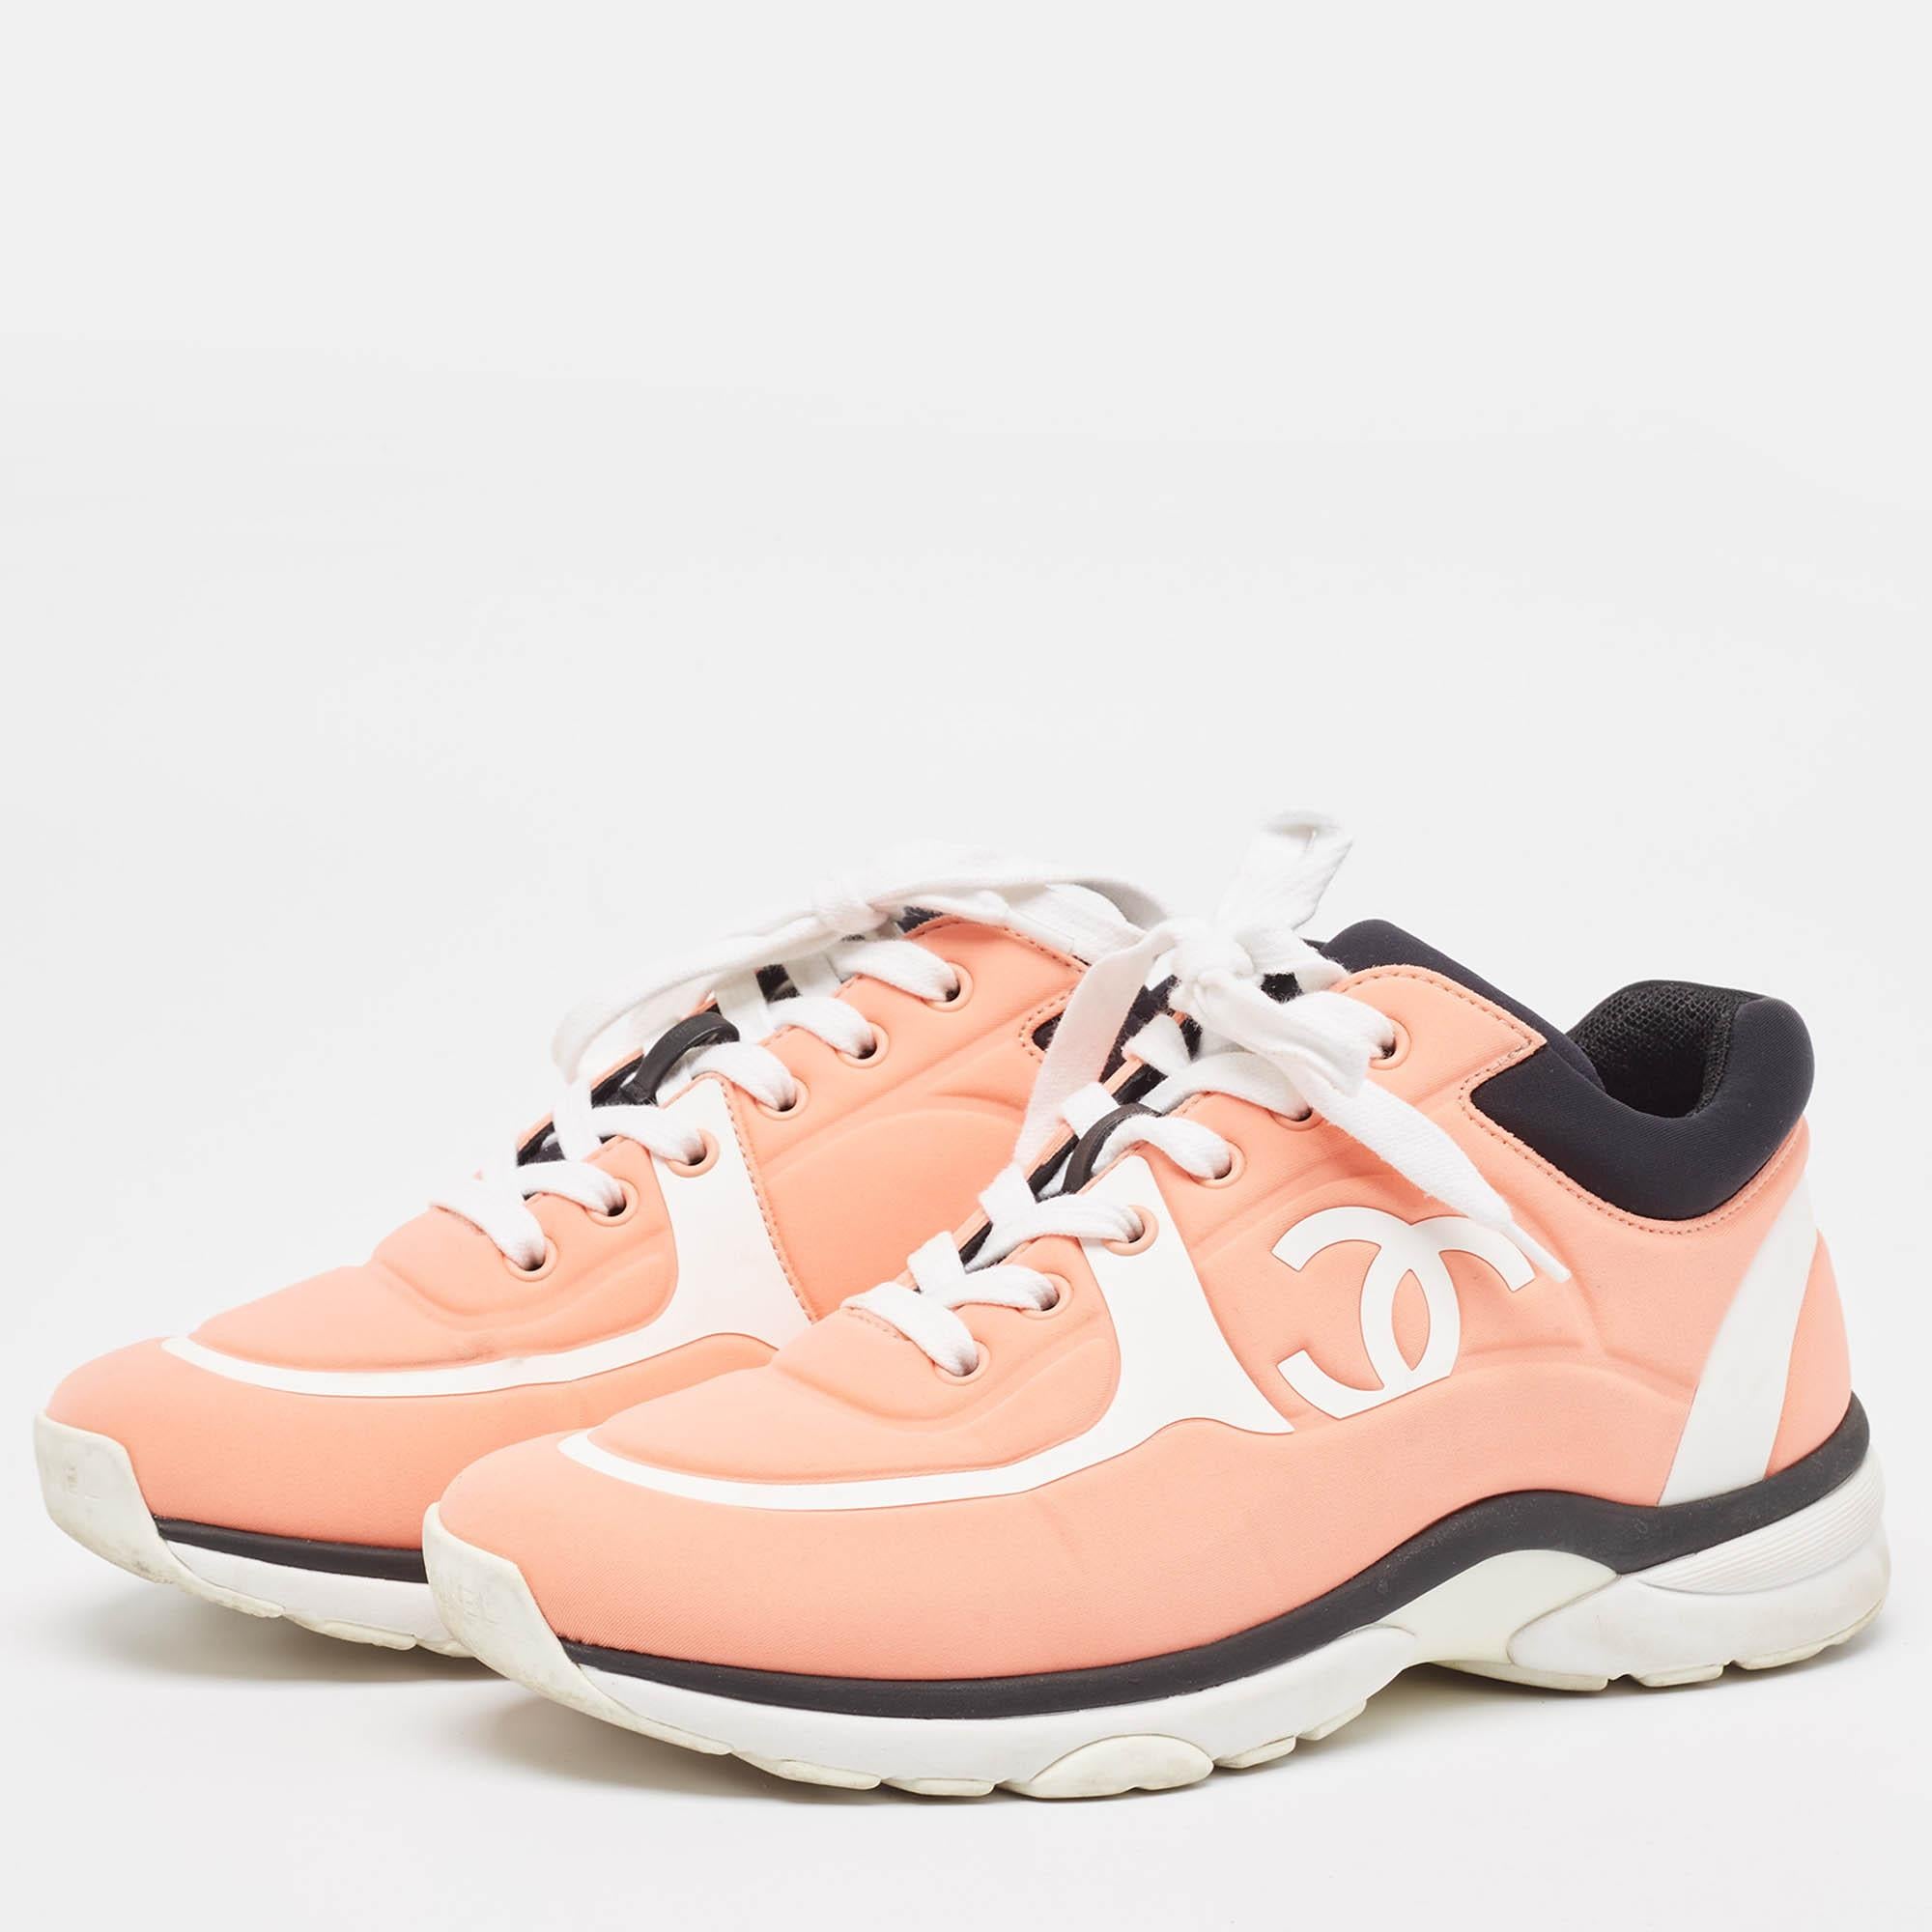 Chanel Coral Pink/White Neoprene CC Low Top Sneakers Size 37.5 For Sale 4